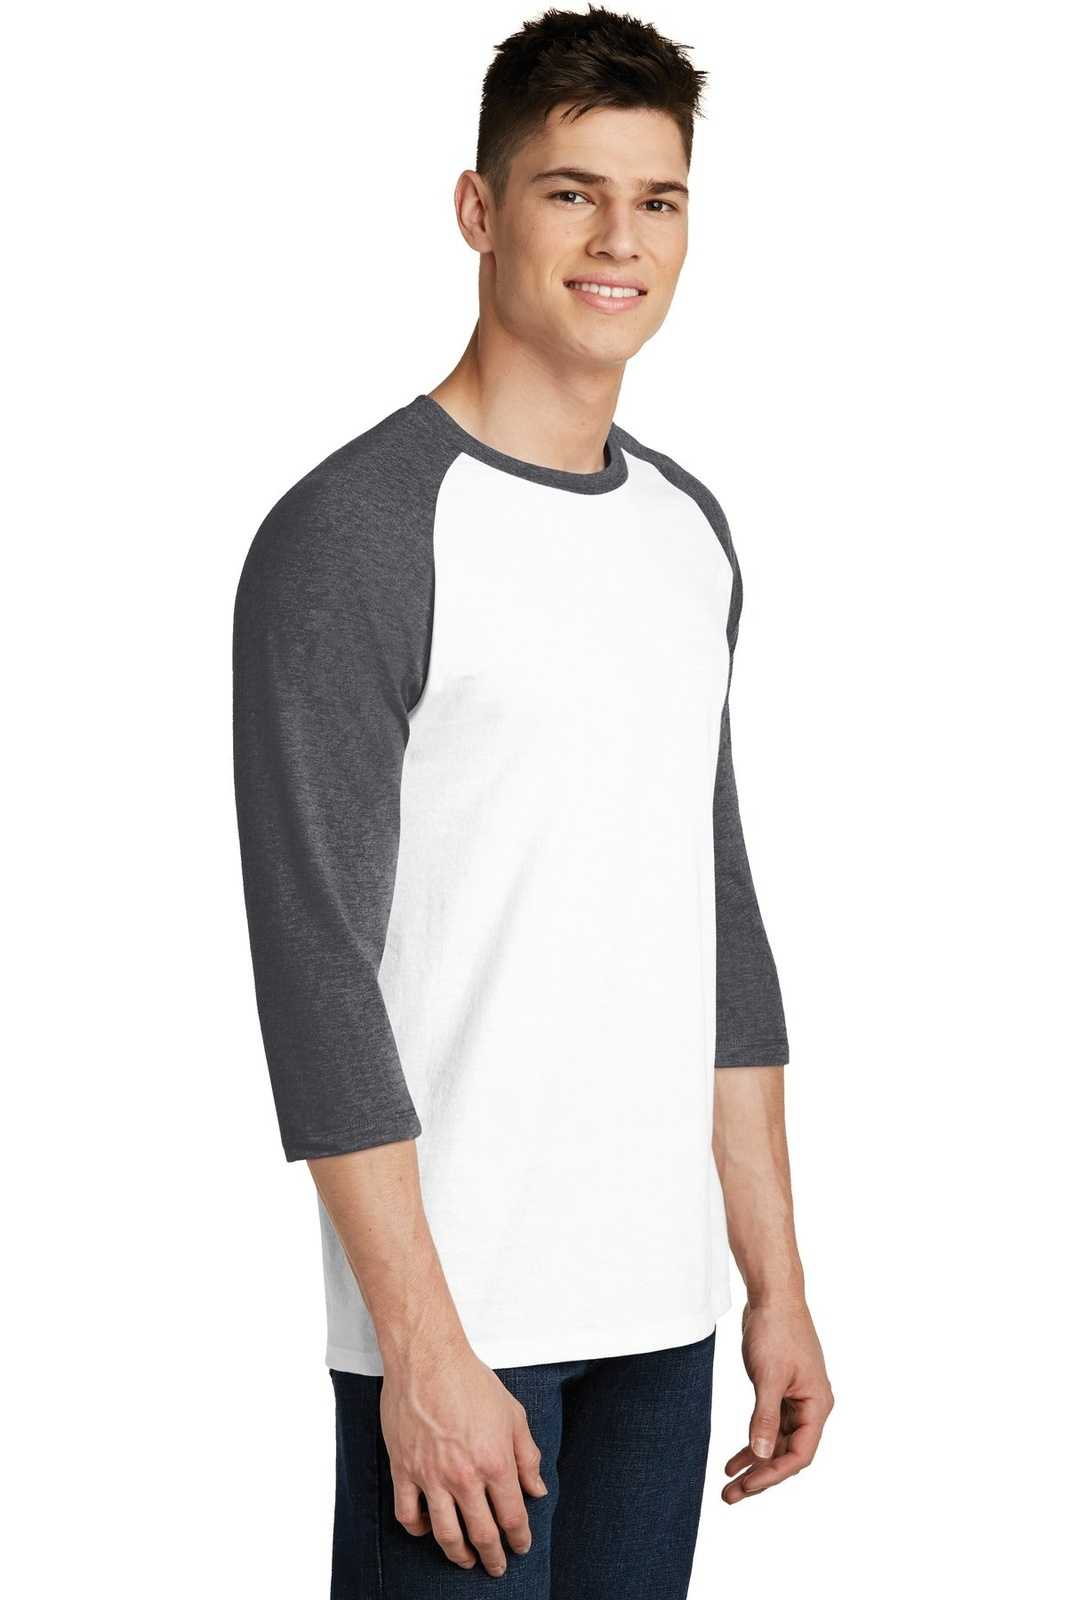 District DT6210 Very Important Tee 3/4-Sleeve Raglan - Heathered Charcoal White - HIT a Double - 4